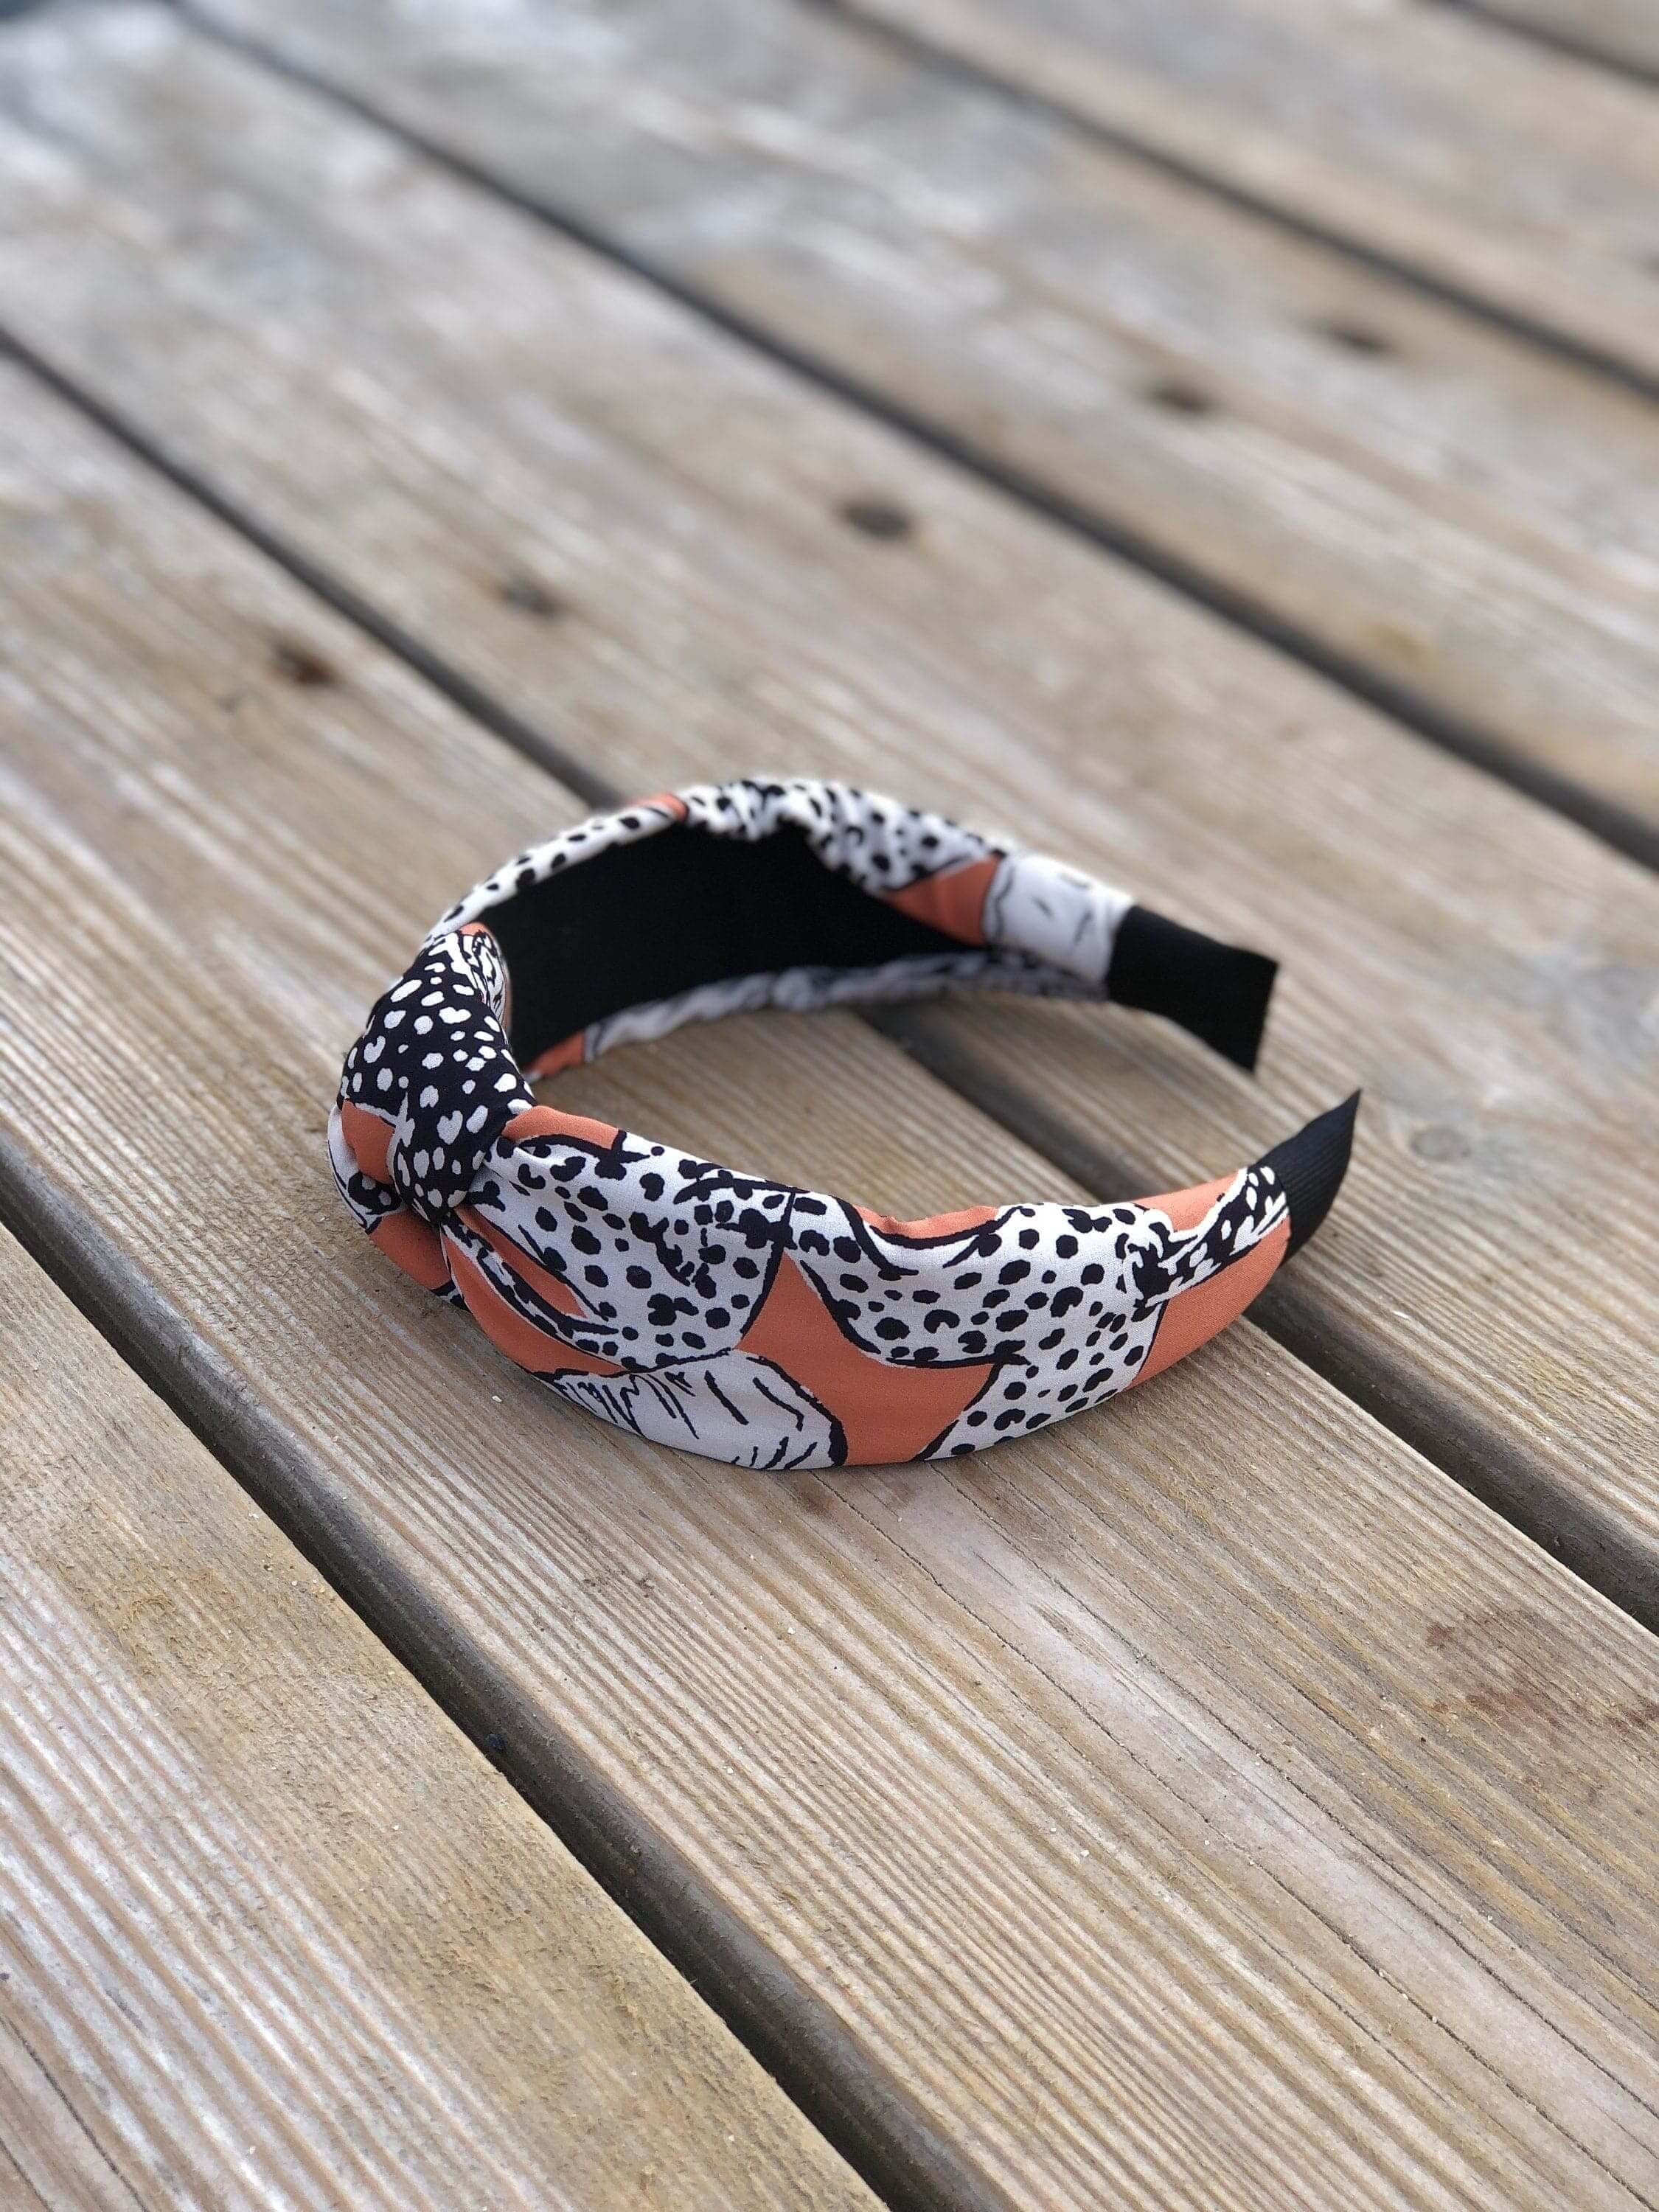 Add a touch of playfulness to your look with this Pinkish Orange Headband